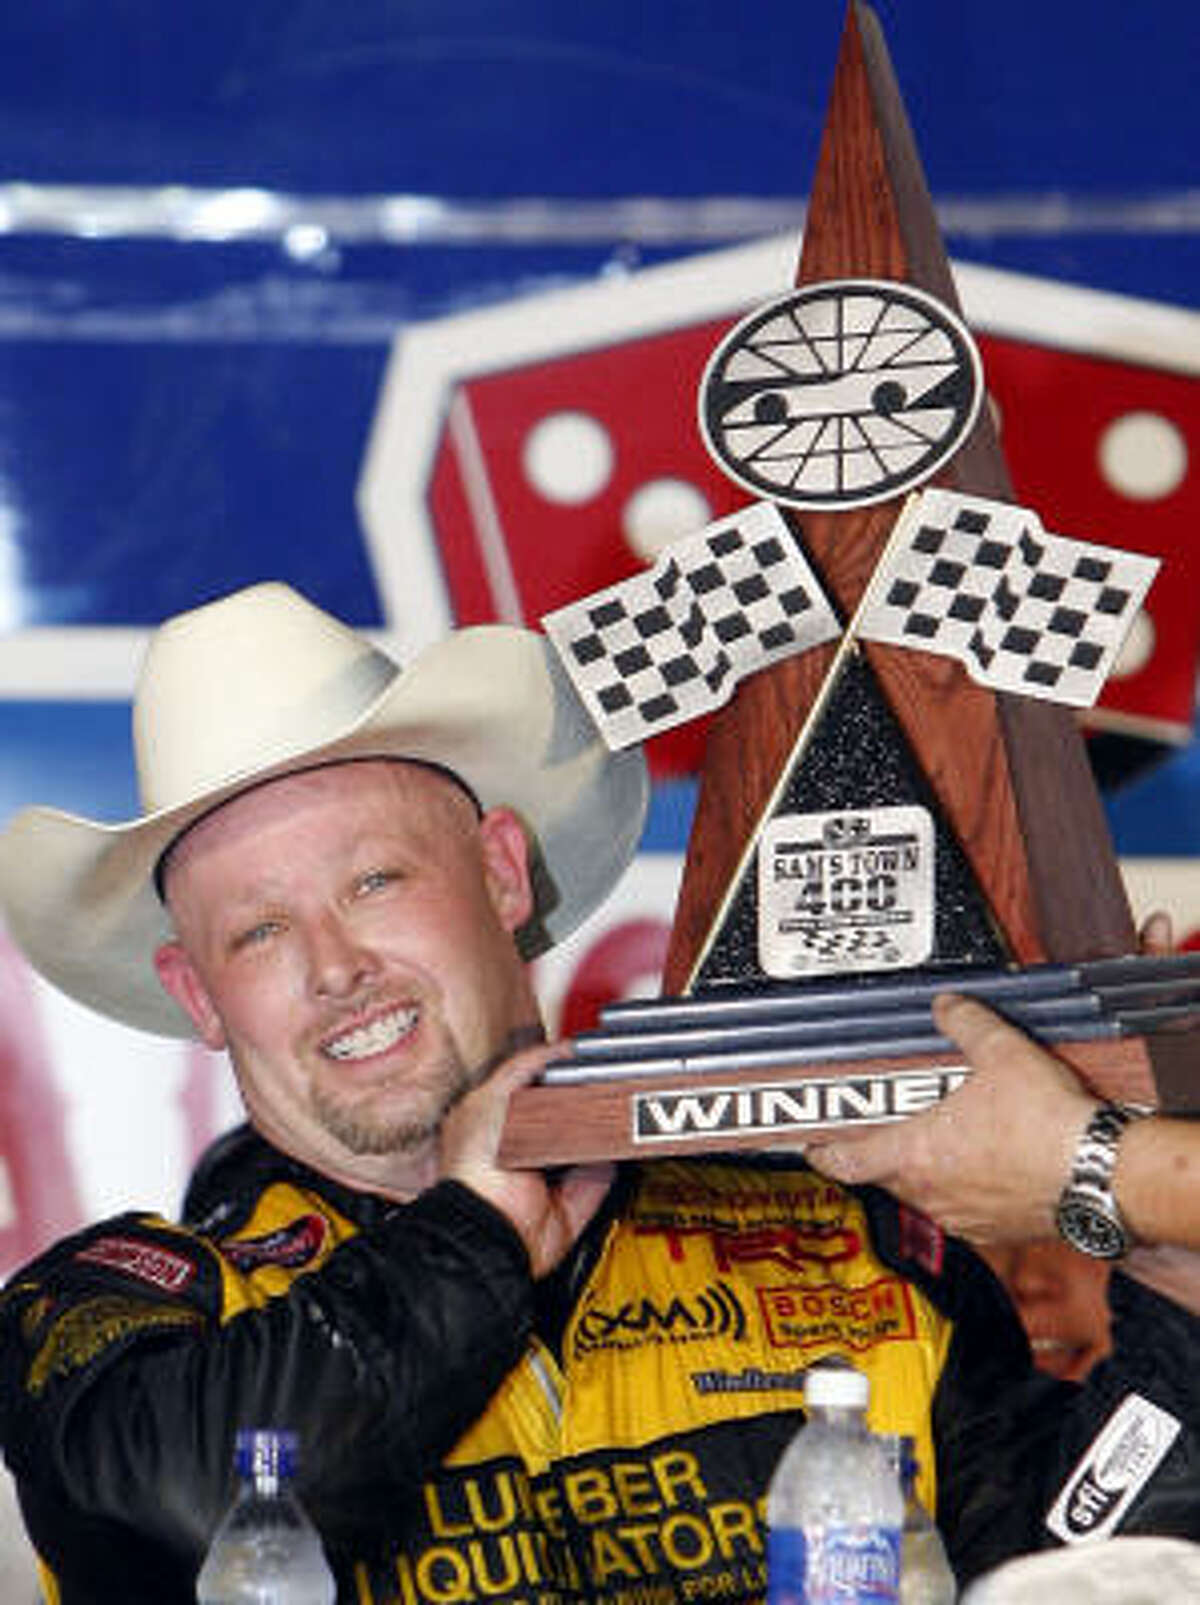 Todd Bodine holds the NASCAR Craftsman Truck Series Sam's Town 400 auto race trophy in victory lane following his win at Texas Motor Speedway on Friday.